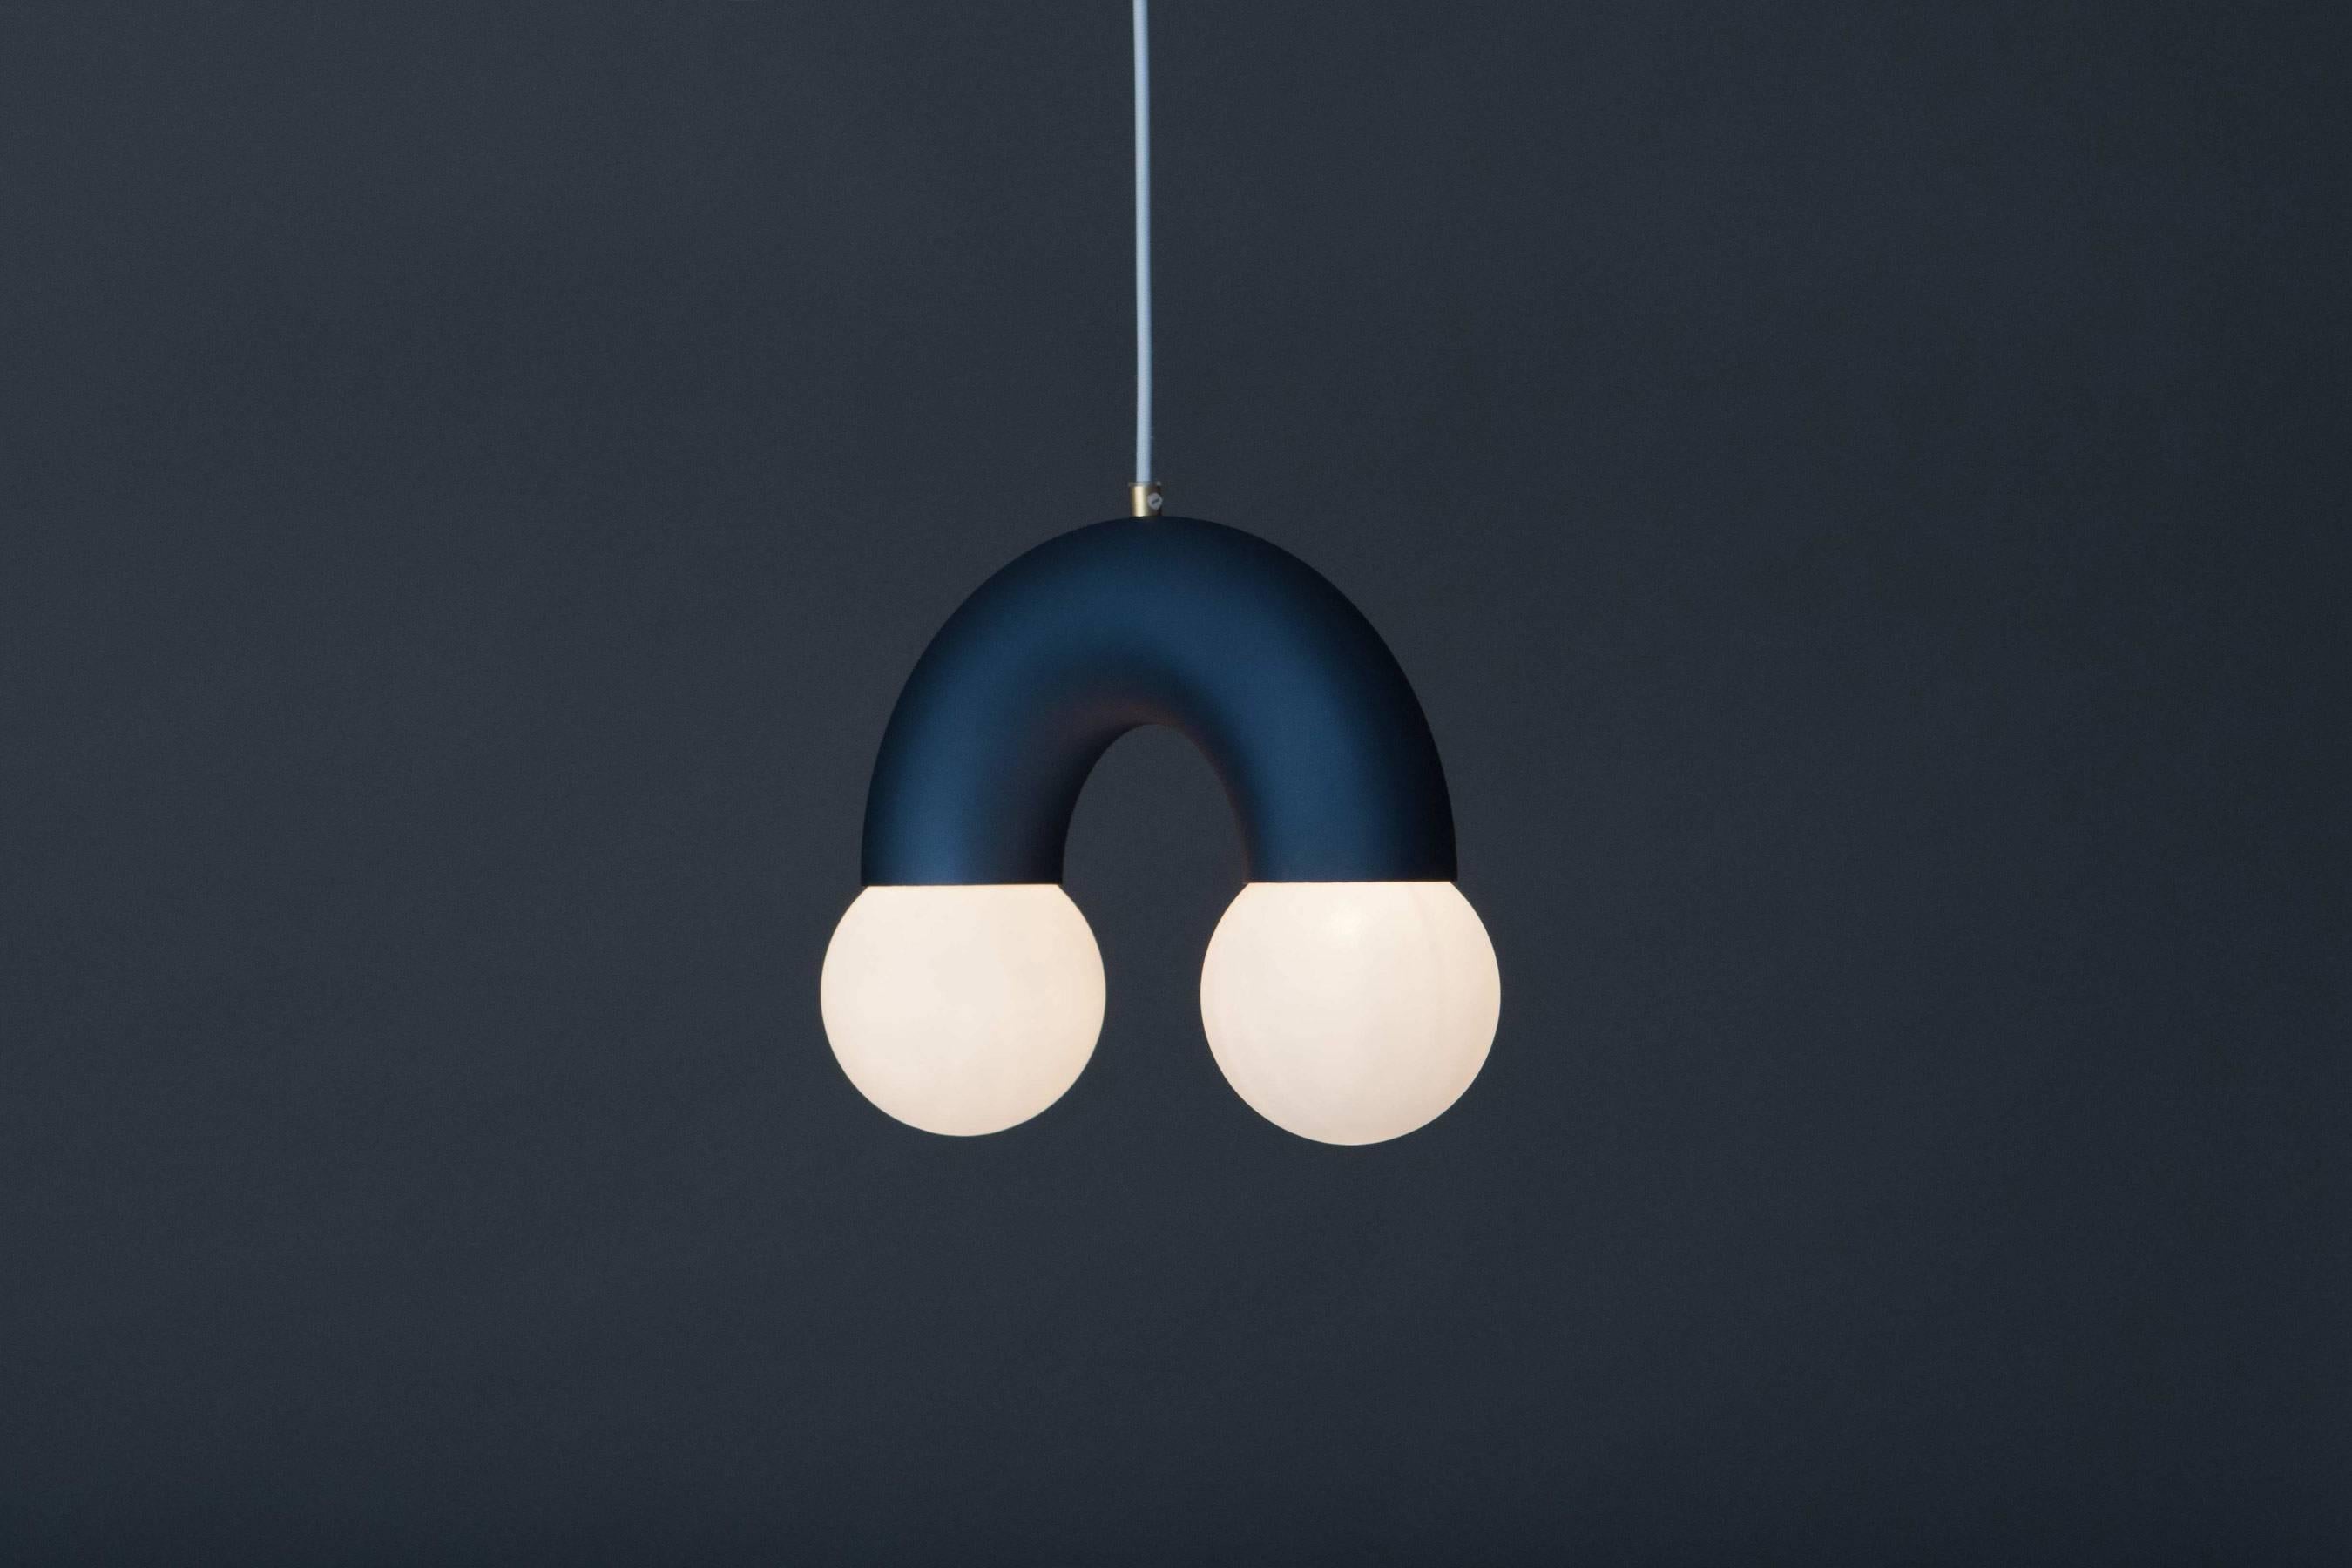 Anodised sandblasted and bent aluminium tube as the main structure with 10cm ø glass globes. The colour of lamp is available in steel blue and gold and natural steel. Brass fixture for holding the textile cable.